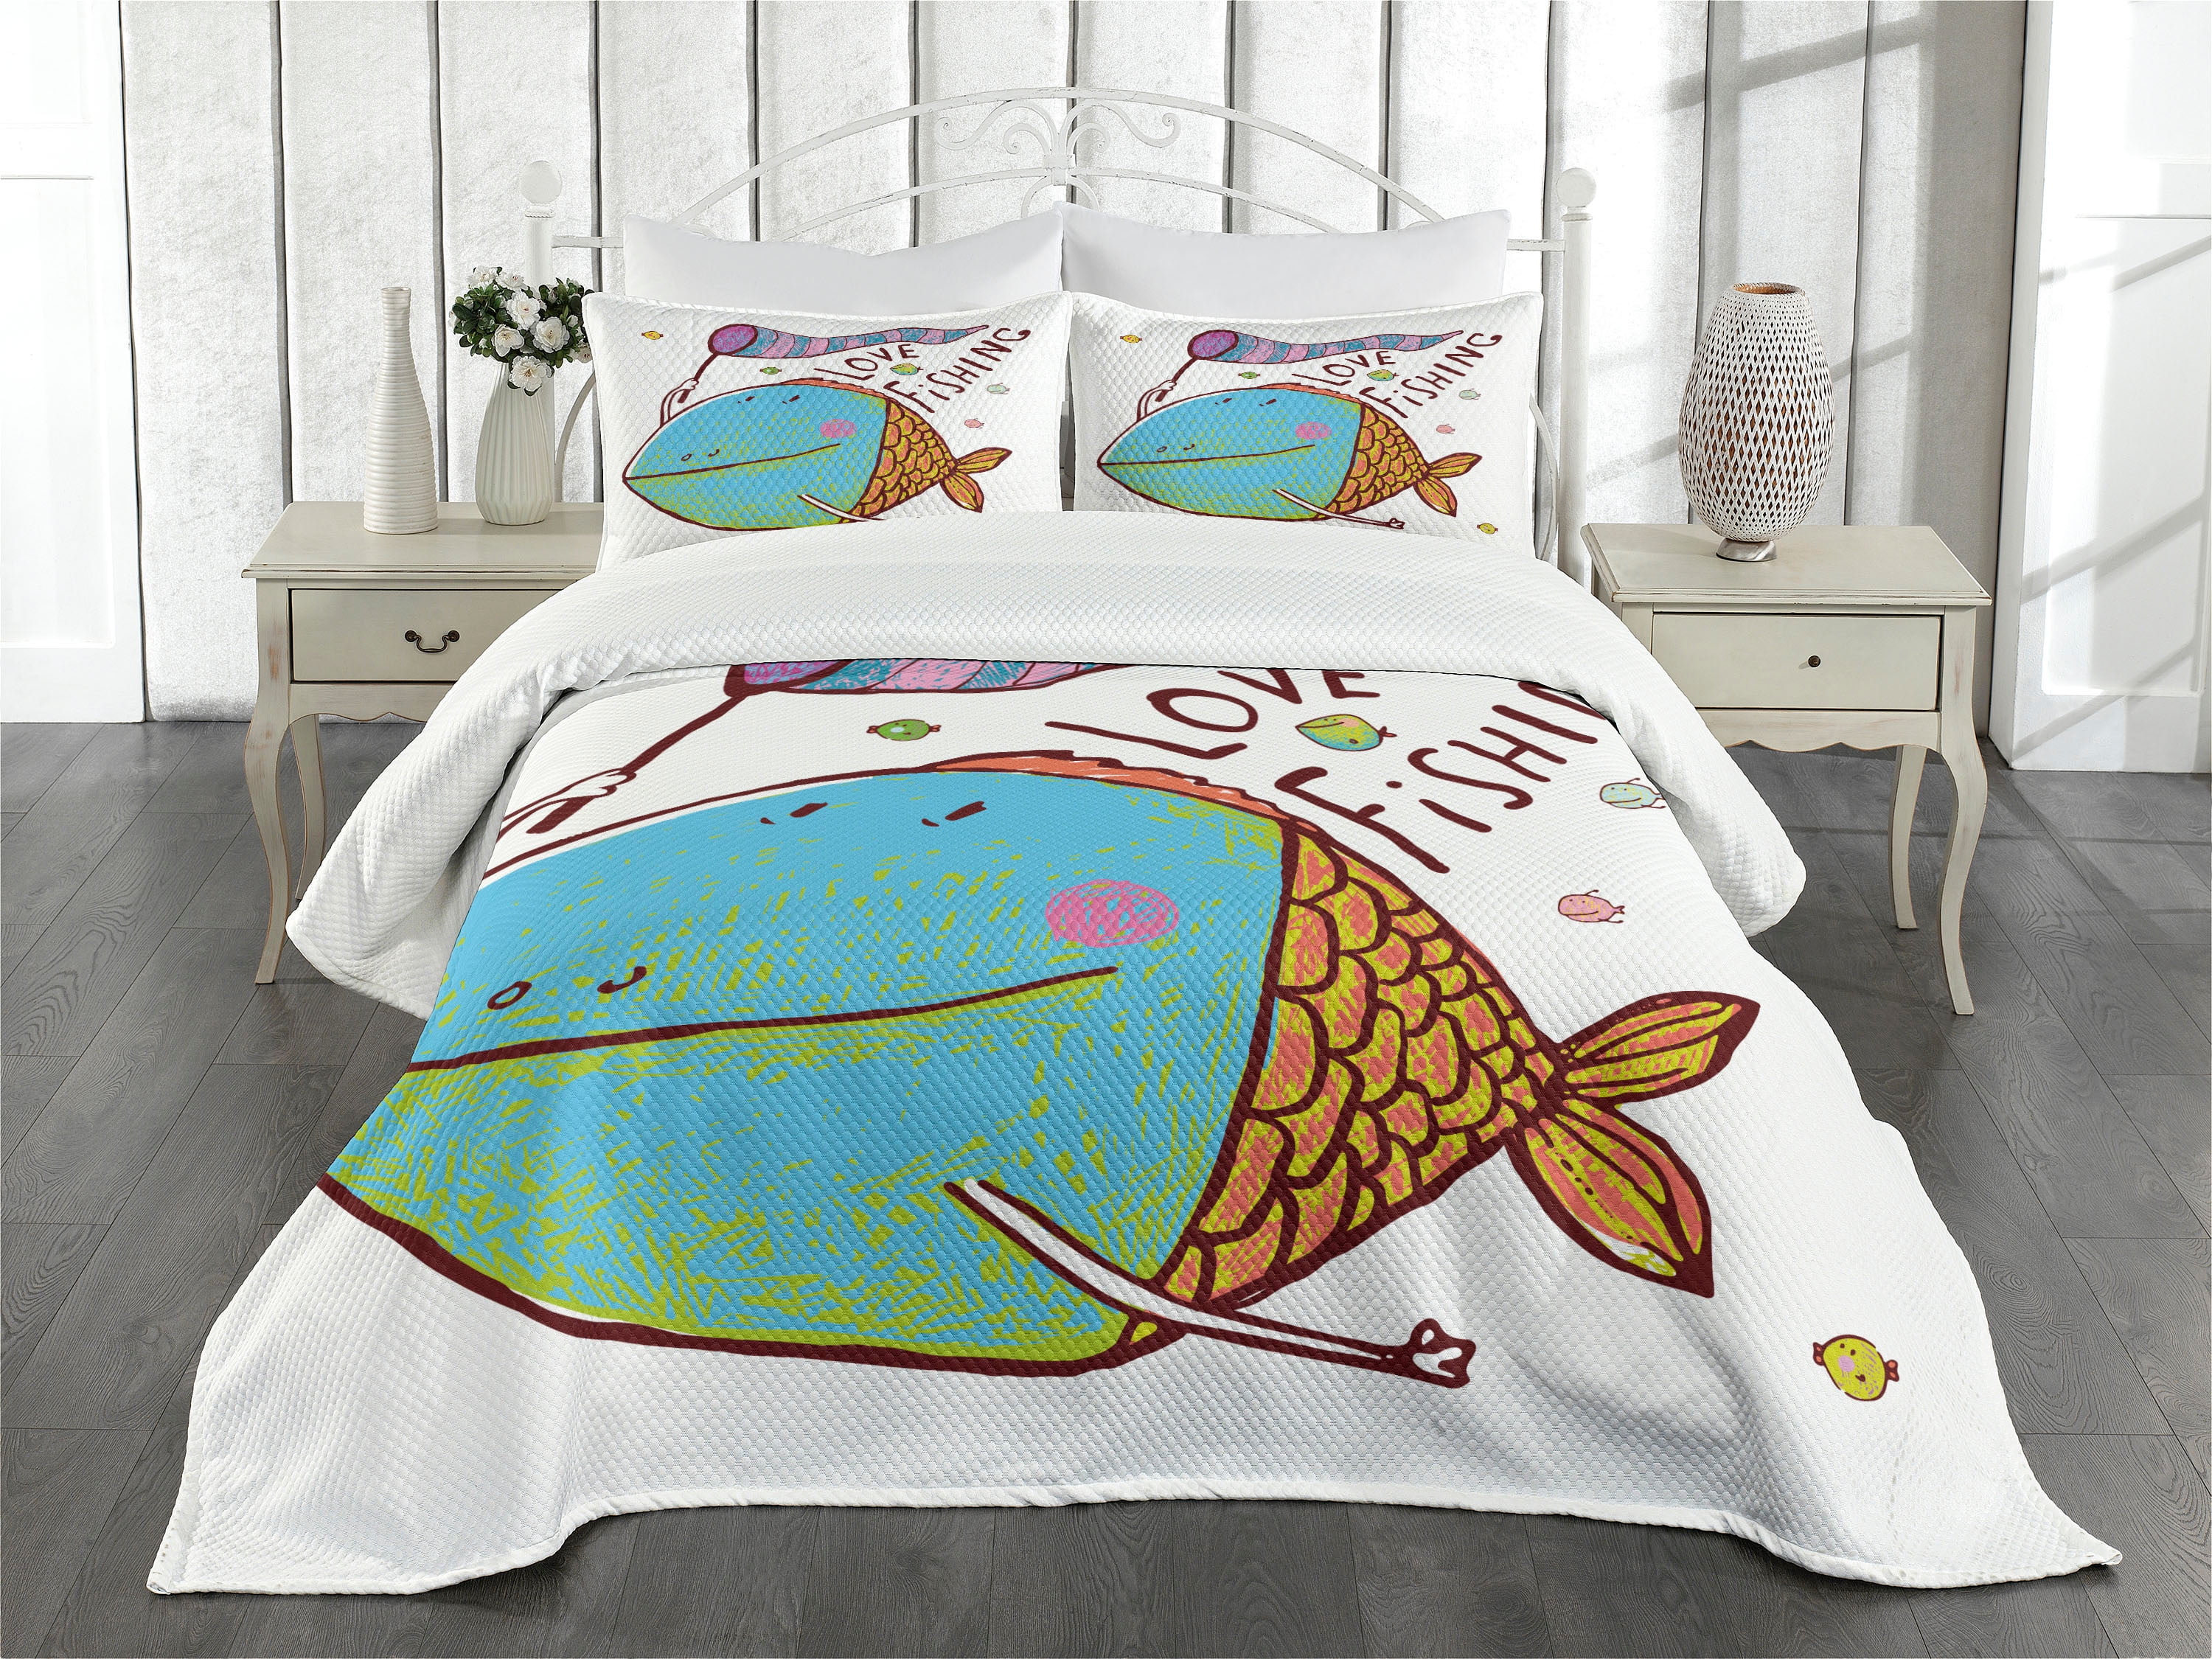 Fishing Bedspread Set King Size, Kids Cute Large Fat Fish Holding a Flag  with Love Quote Humor Fun Nursery Theme, Quilted 3 Piece Decor Coverlet Set